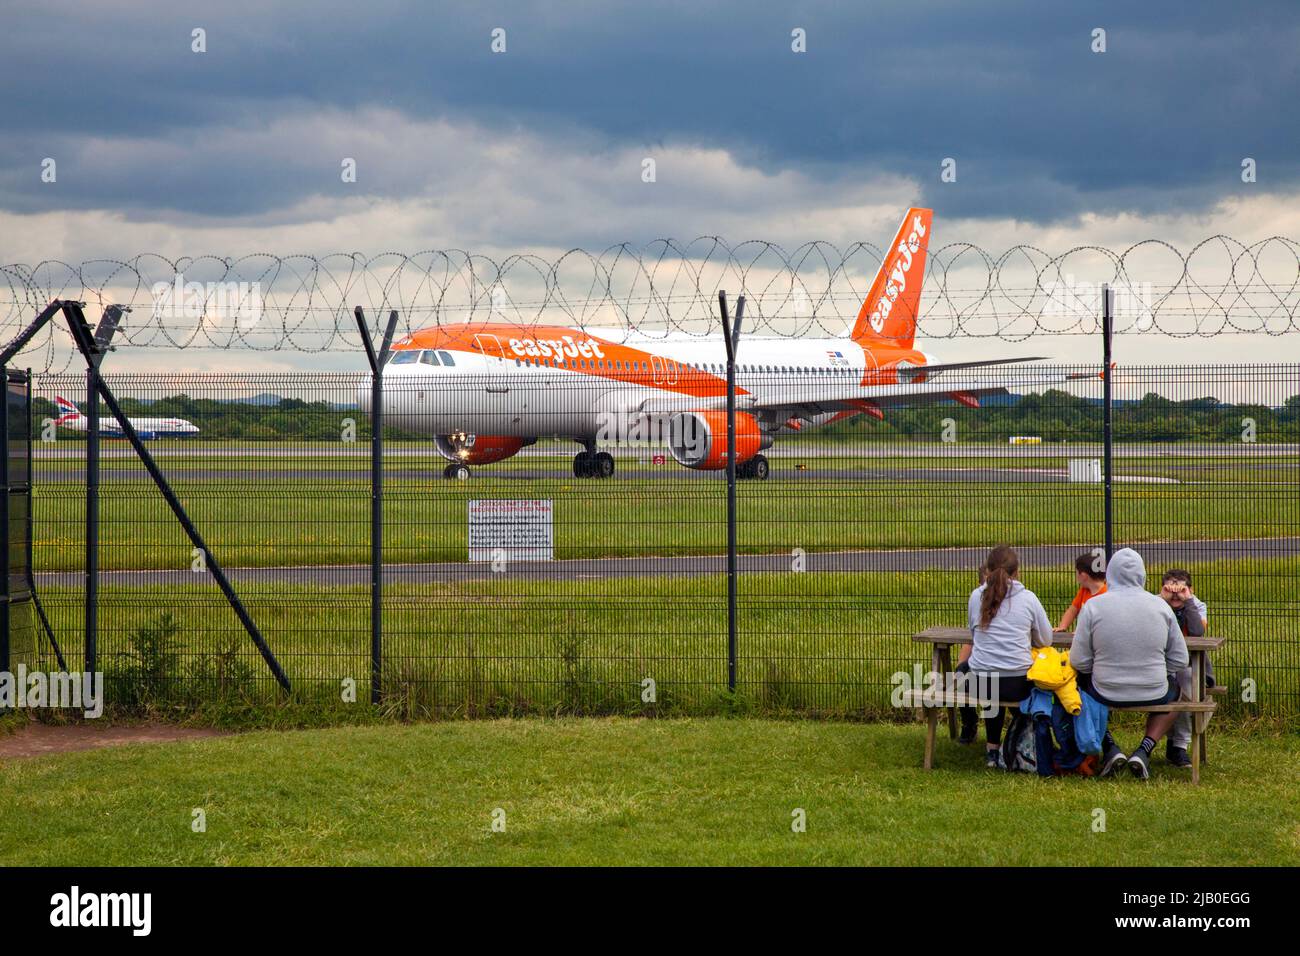 manchester Airport's viewing platform, June 2022 Stock Photo